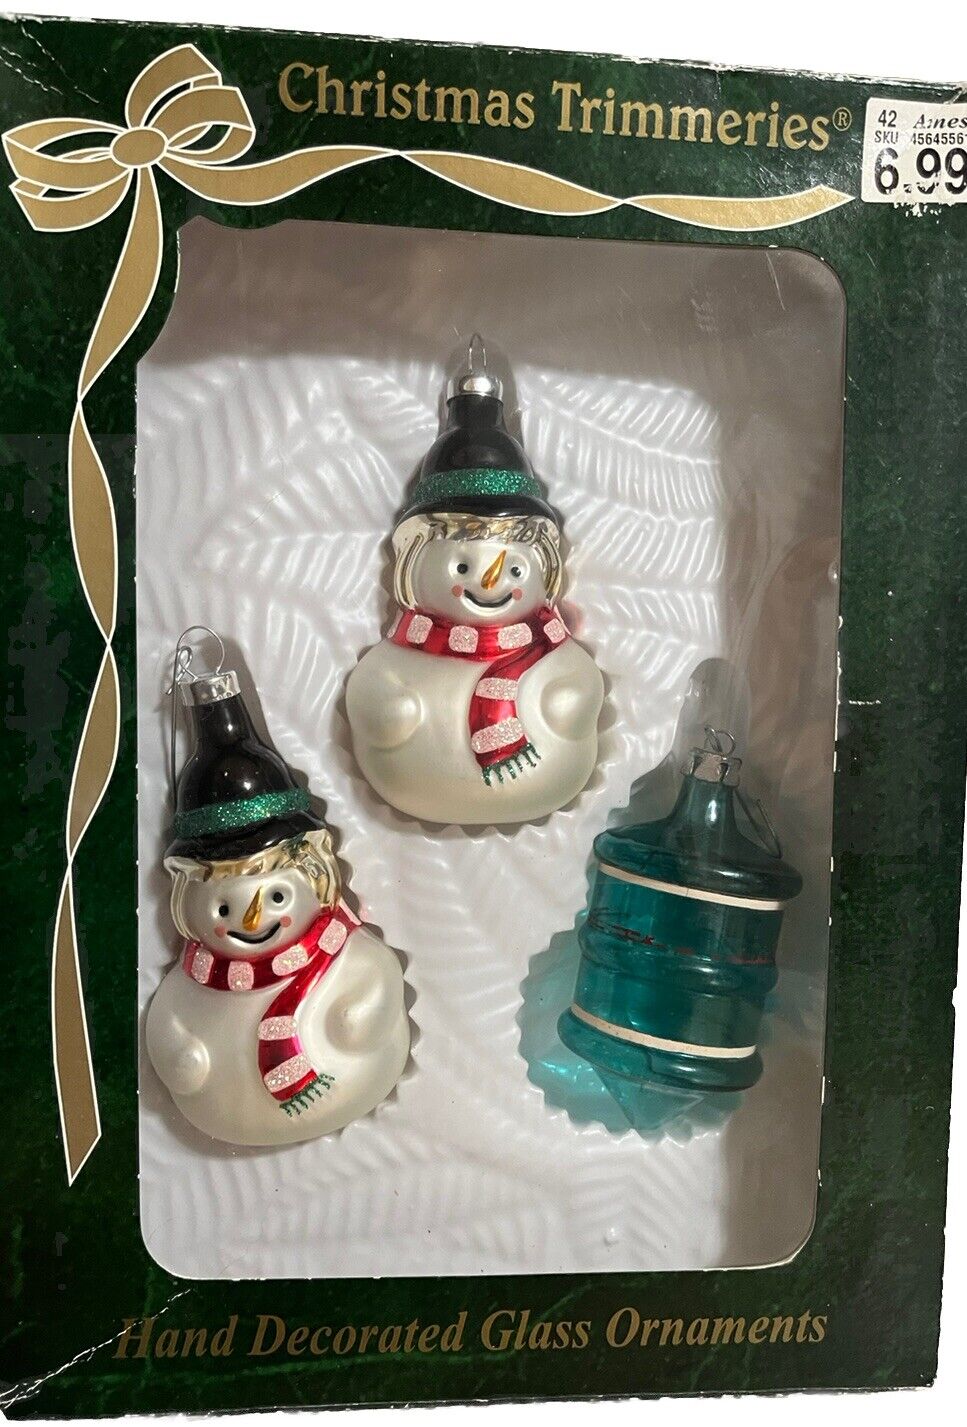 Vtg Bradford Christmas Trimmeries Ornaments Snowmen Set of 2 With Extra